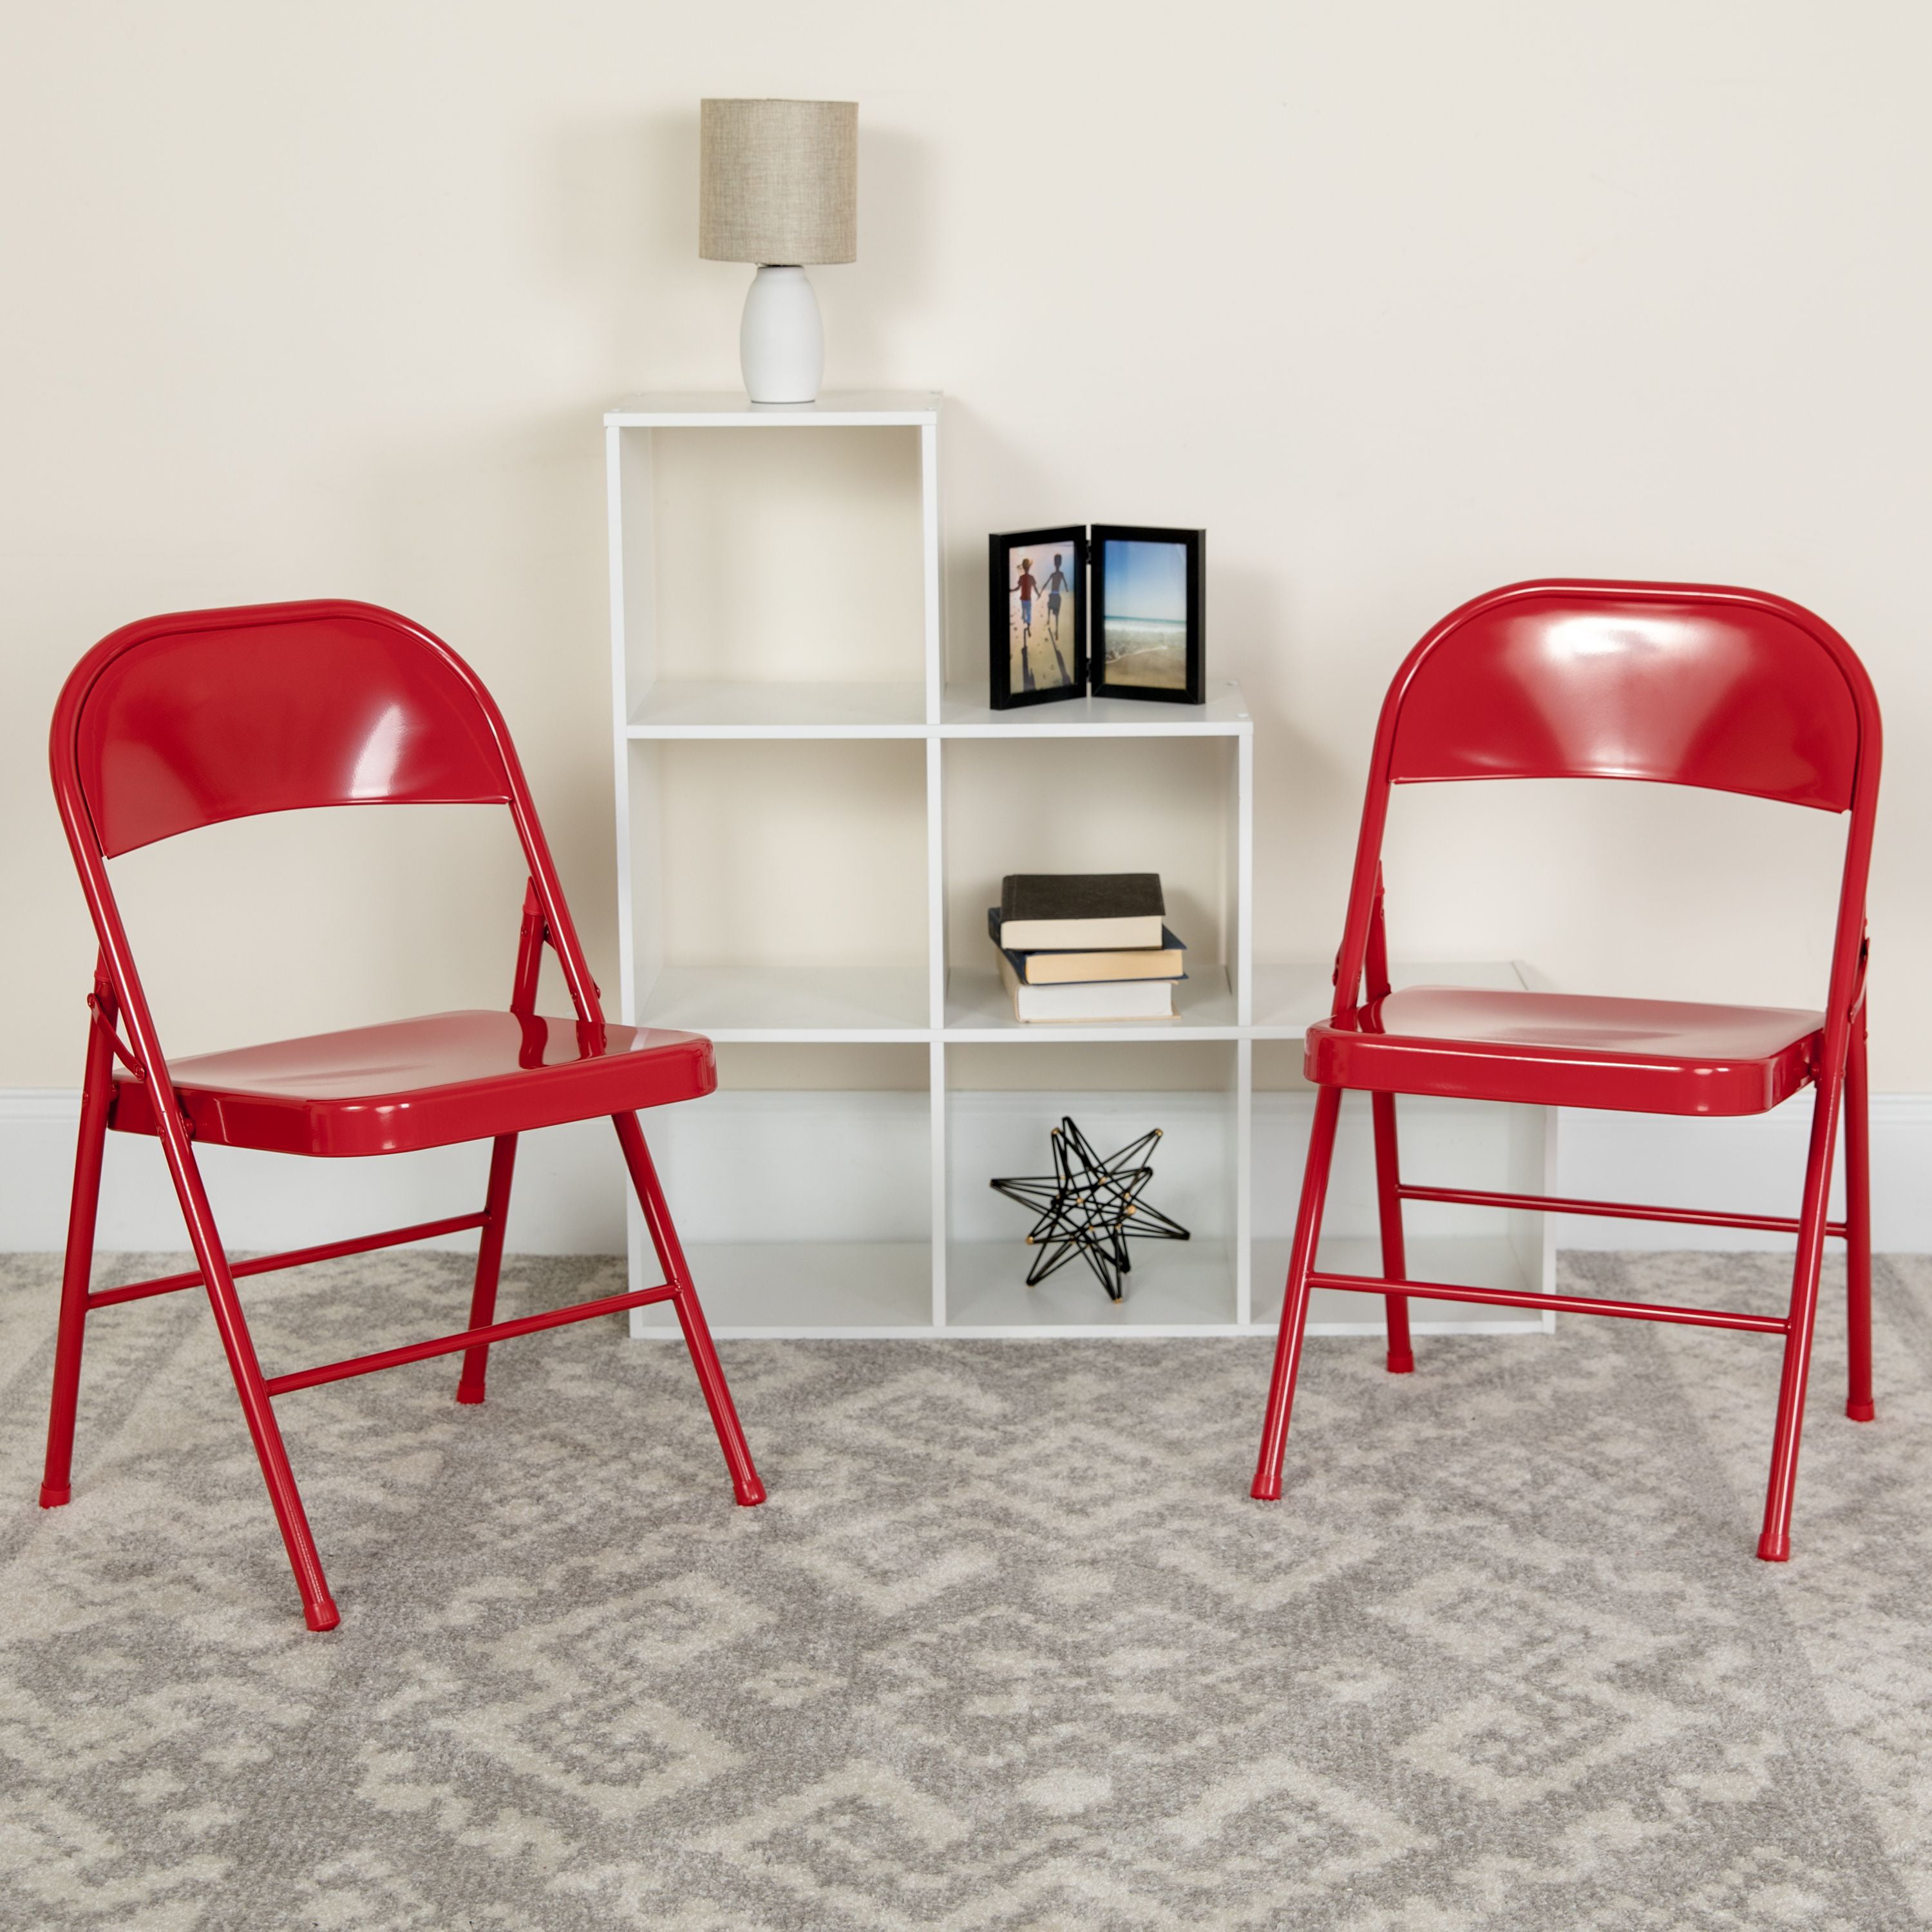 Creatice Metal Folding Chairs Walmart for Large Space